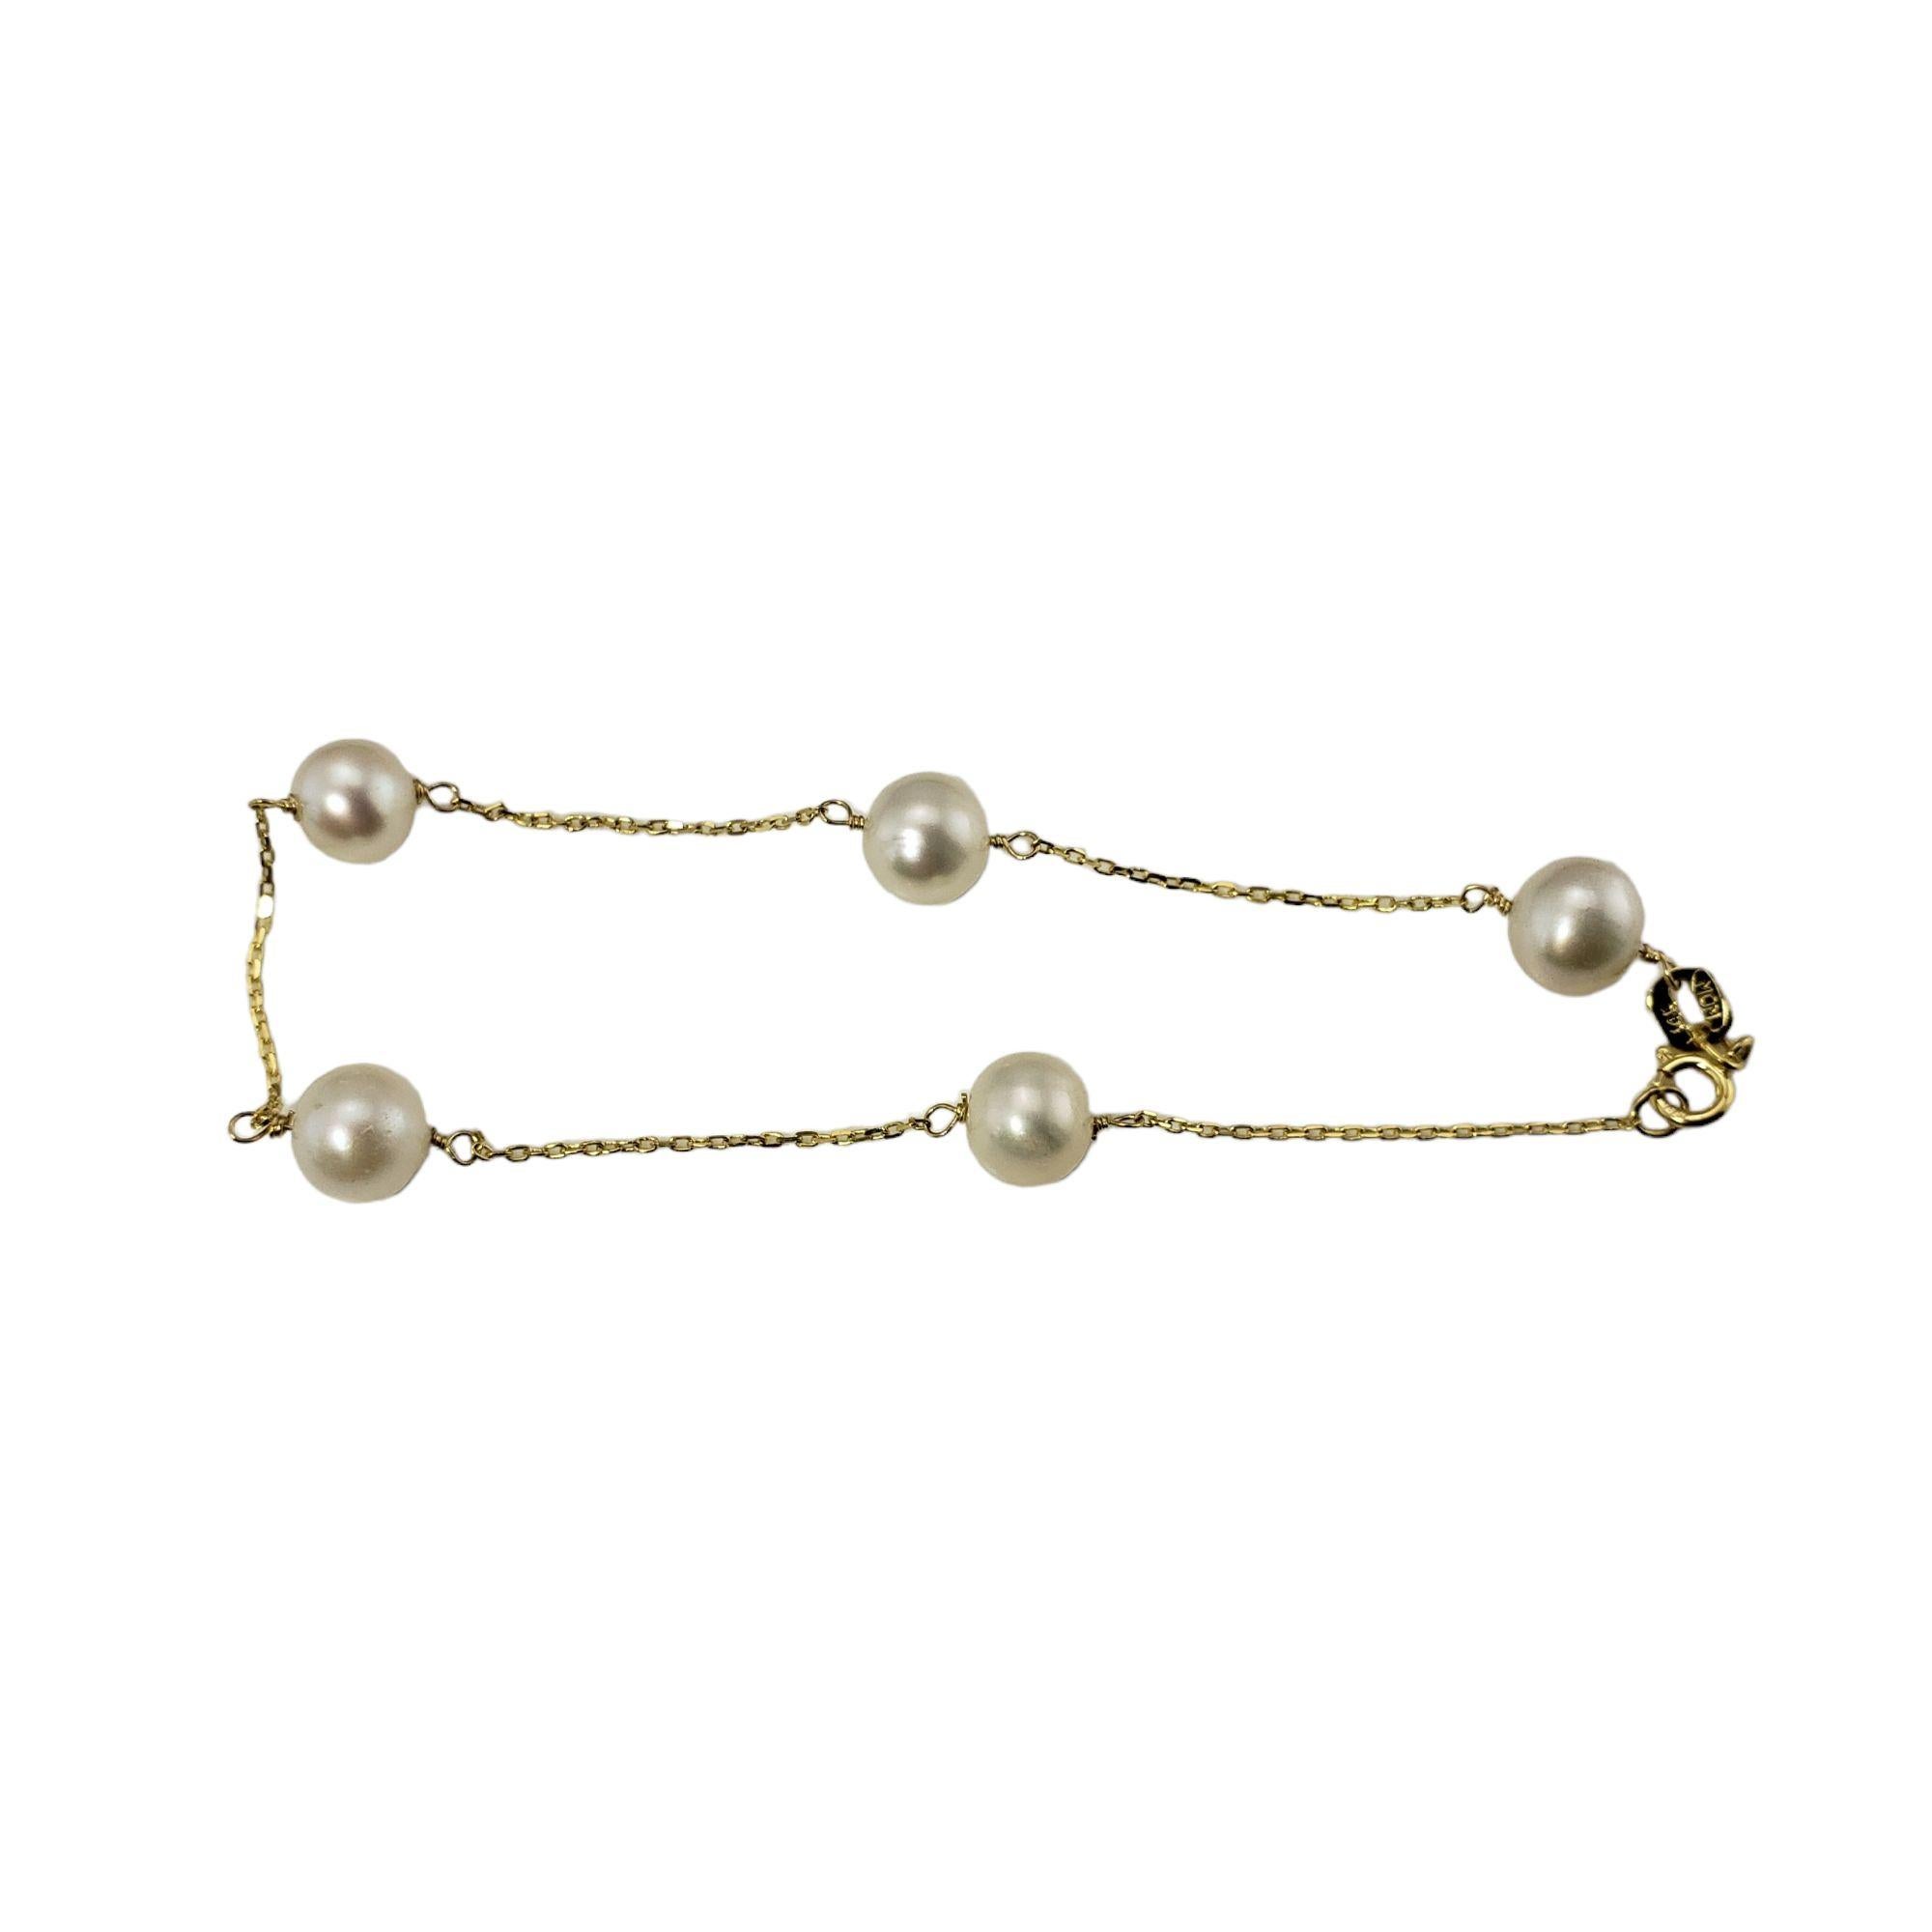 This lovely bracelet features five round pearls (6 mm each) set on a classic cable chain.

Size: 6.5 inches

Weight:  1.3 dwt. /  2.1 gr.

Stamped: 14K

Very good condition, professionally polished.

Will come packaged in a gift box or pouch (when